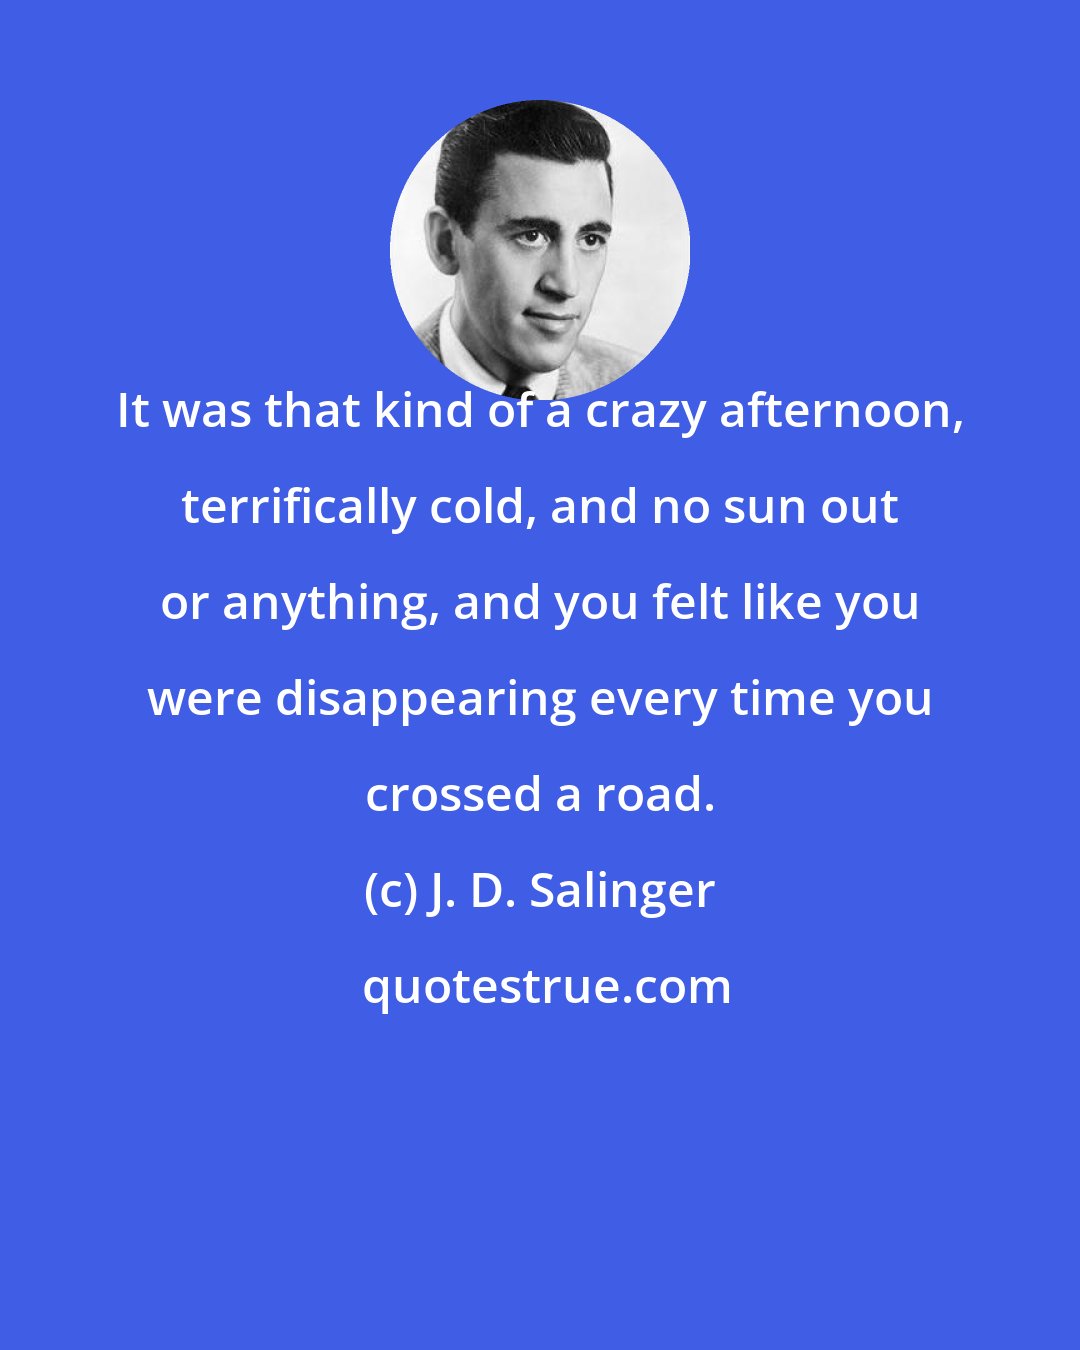 J. D. Salinger: It was that kind of a crazy afternoon, terrifically cold, and no sun out or anything, and you felt like you were disappearing every time you crossed a road.